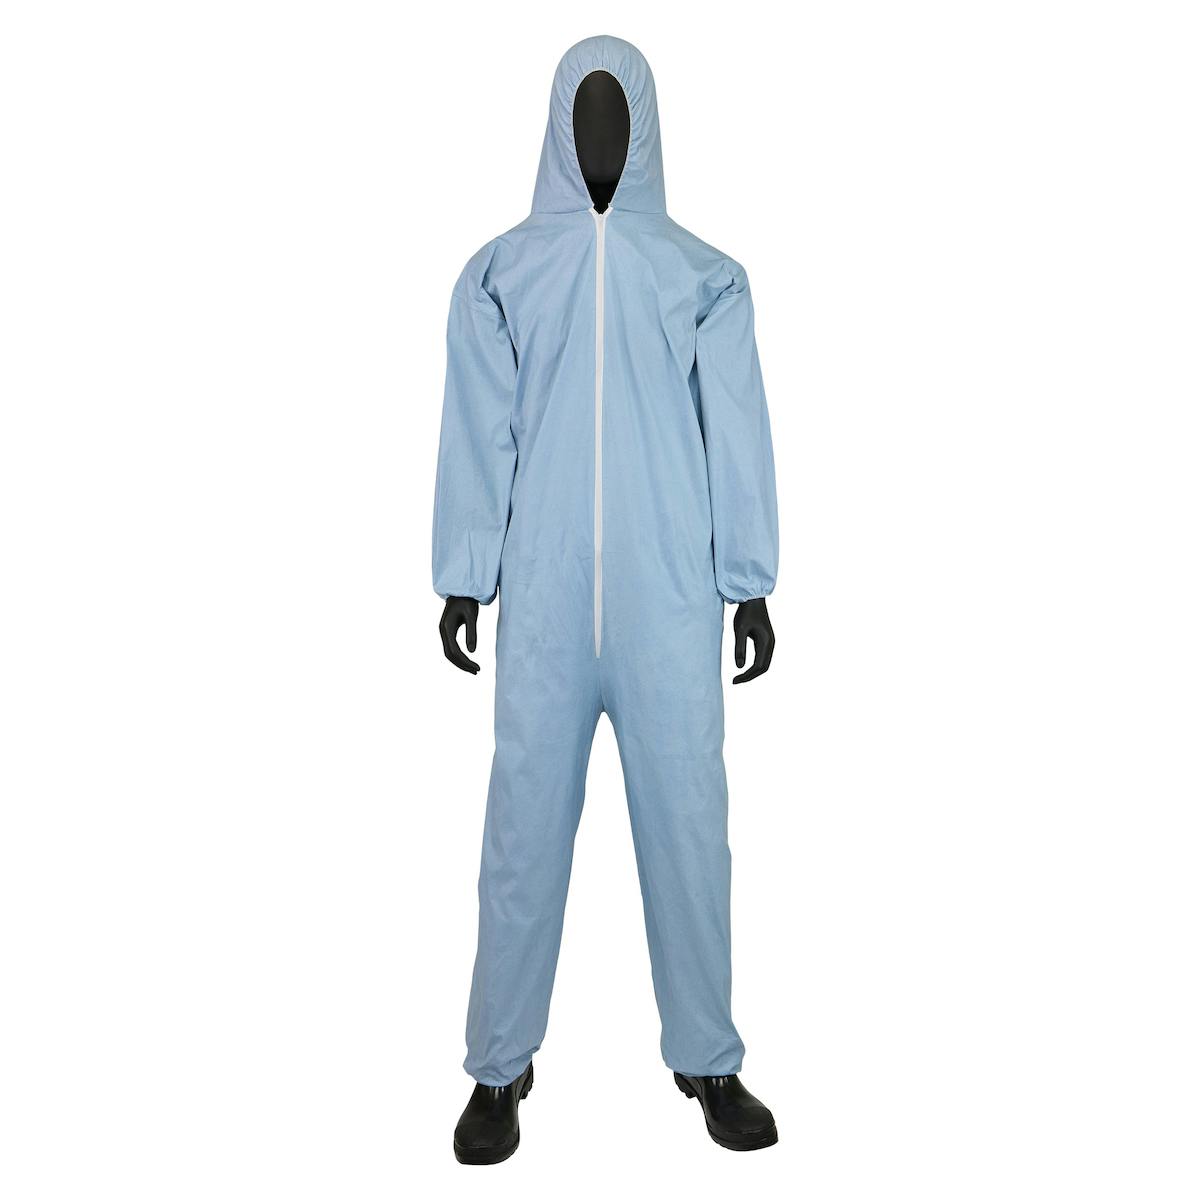 Posi-Wear Flame Resistant Coverall with Hood, Elastic Wrists and Ankles, 80 gsm, Blue (3106)_0